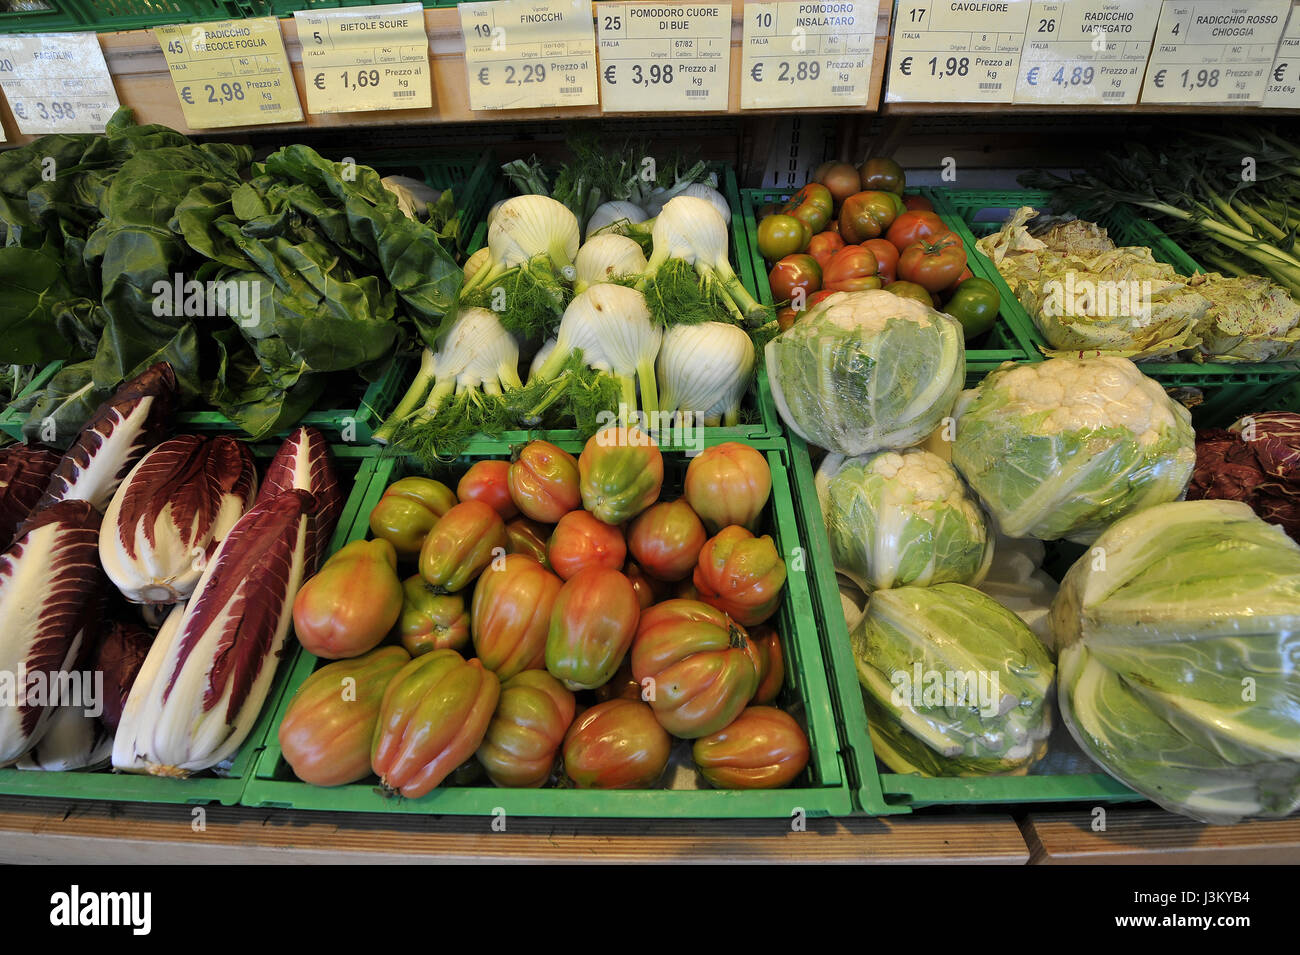 vegetable and fruit shelf in a supermarket Stock Photo